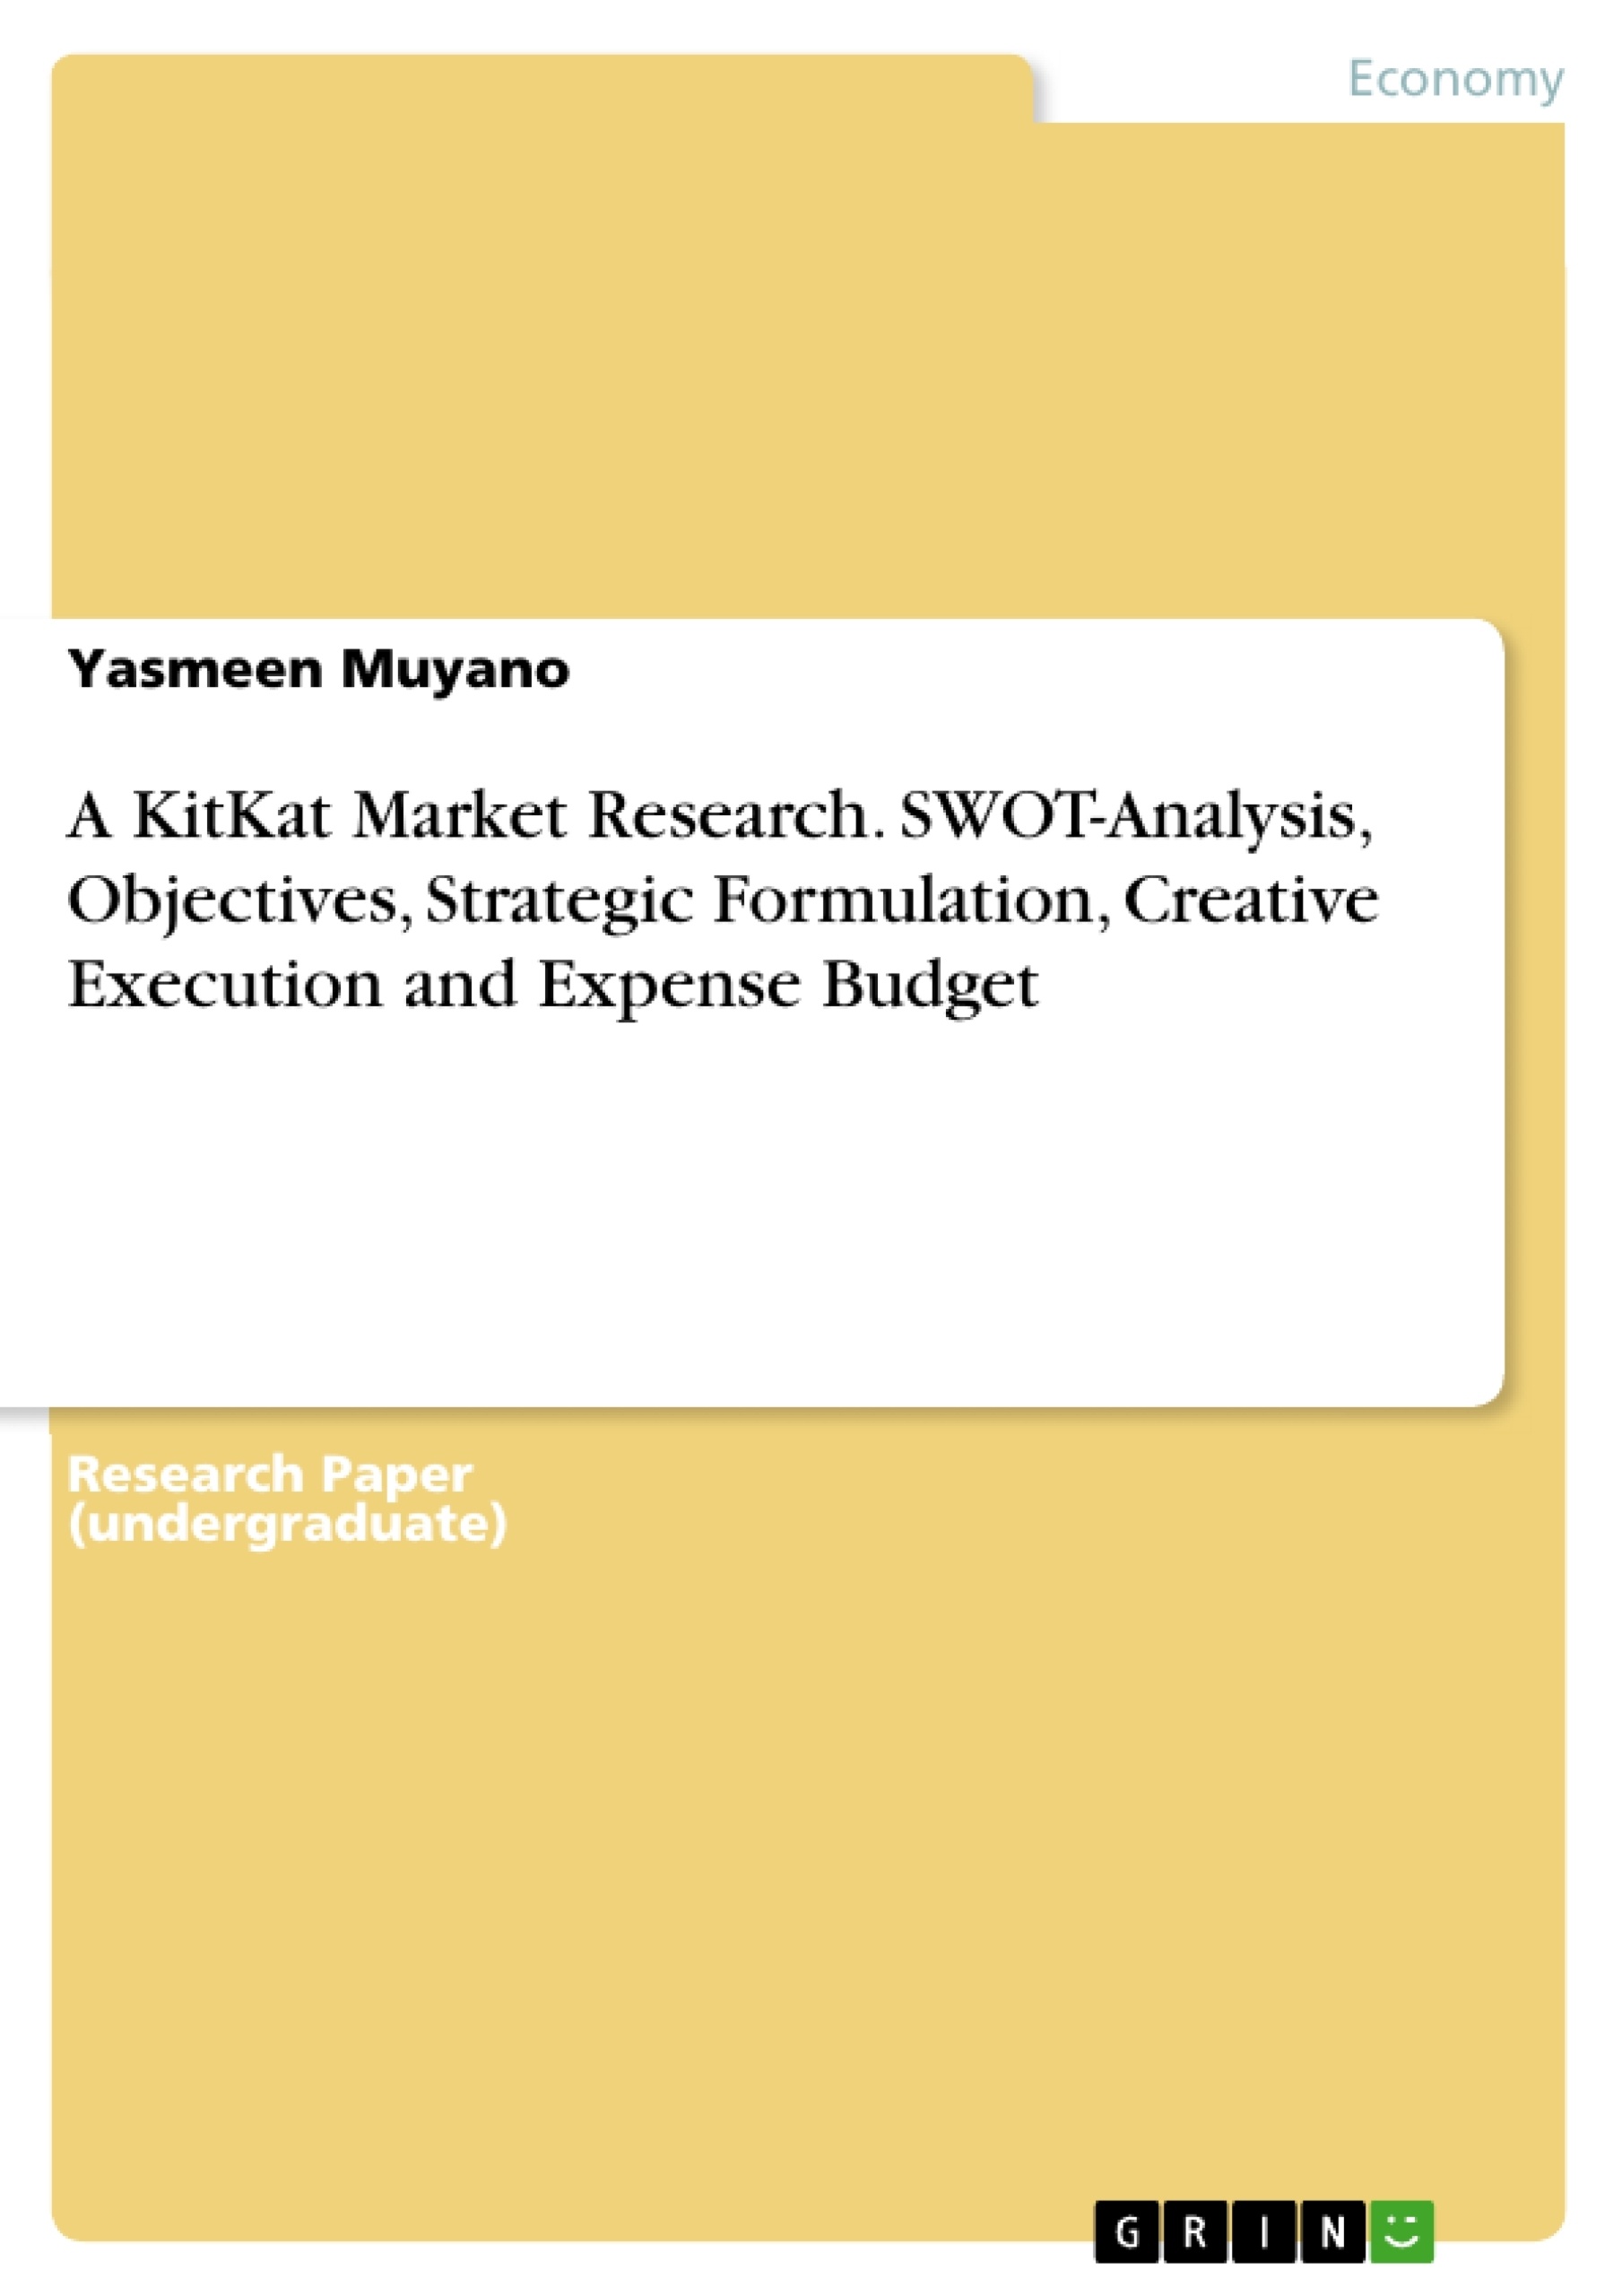 Title: A KitKat Market Research. SWOT-Analysis, Objectives, Strategic Formulation, Creative Execution and Expense Budget